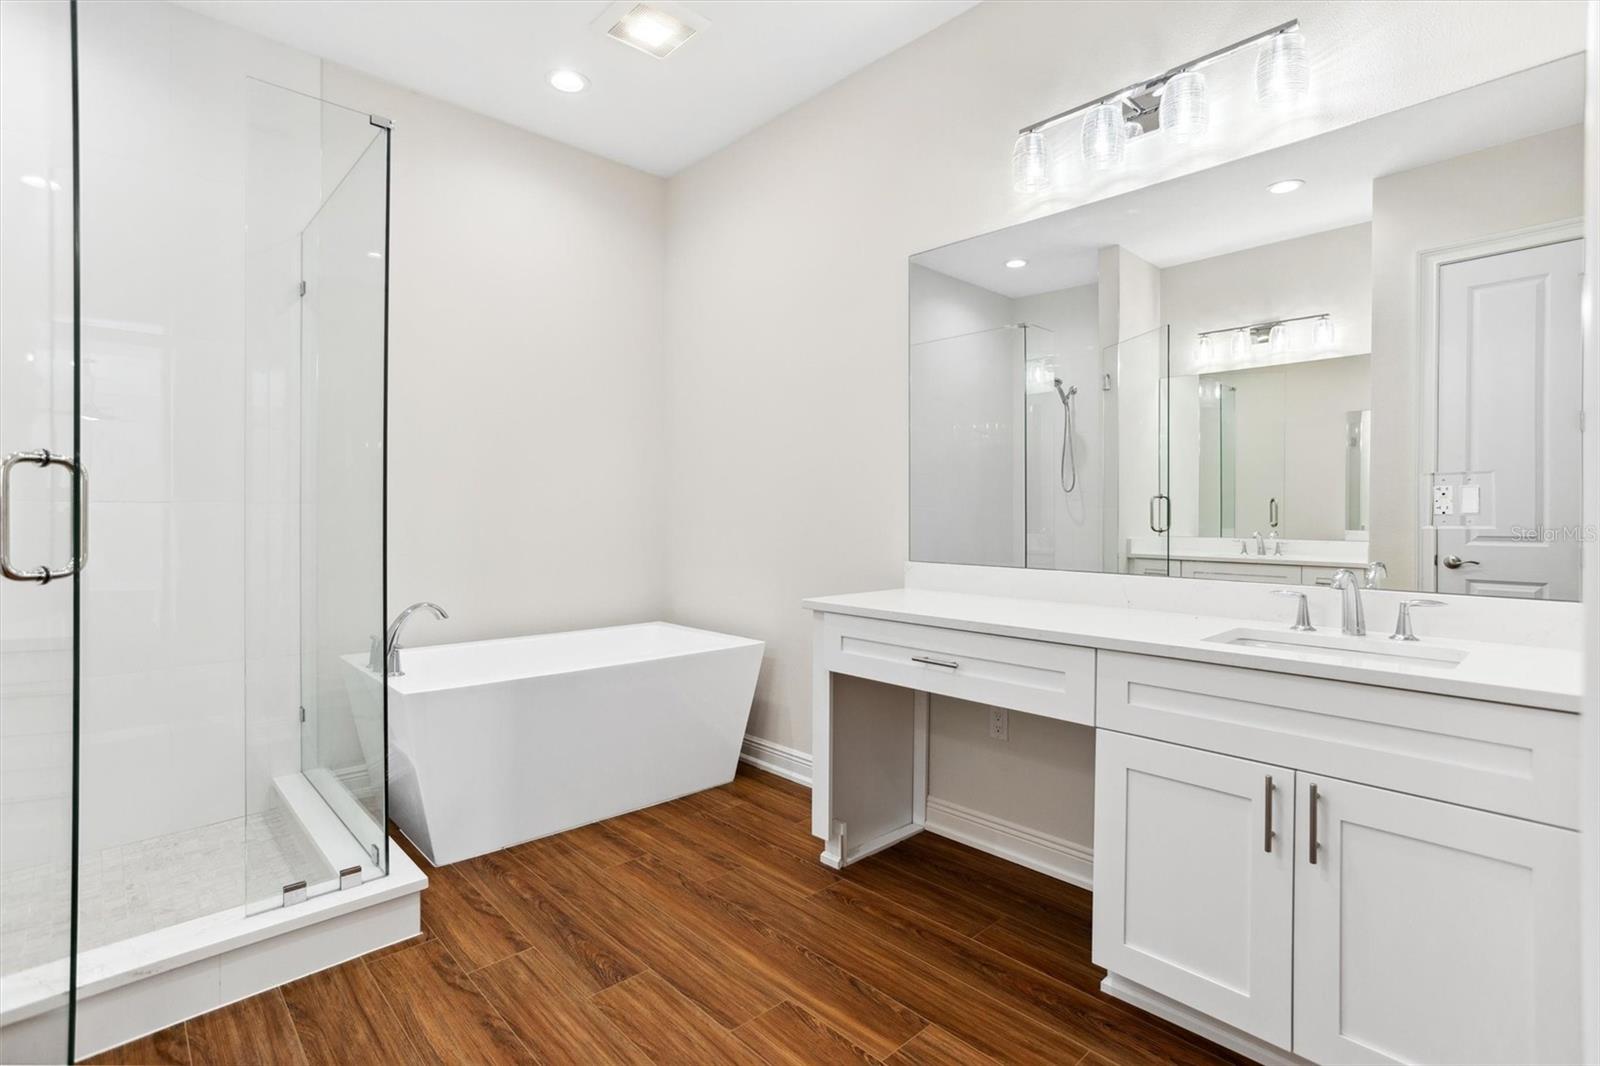 Main Bathroom with dual vanities, oversized shower, shower bench, soaking tub and separate water closet.